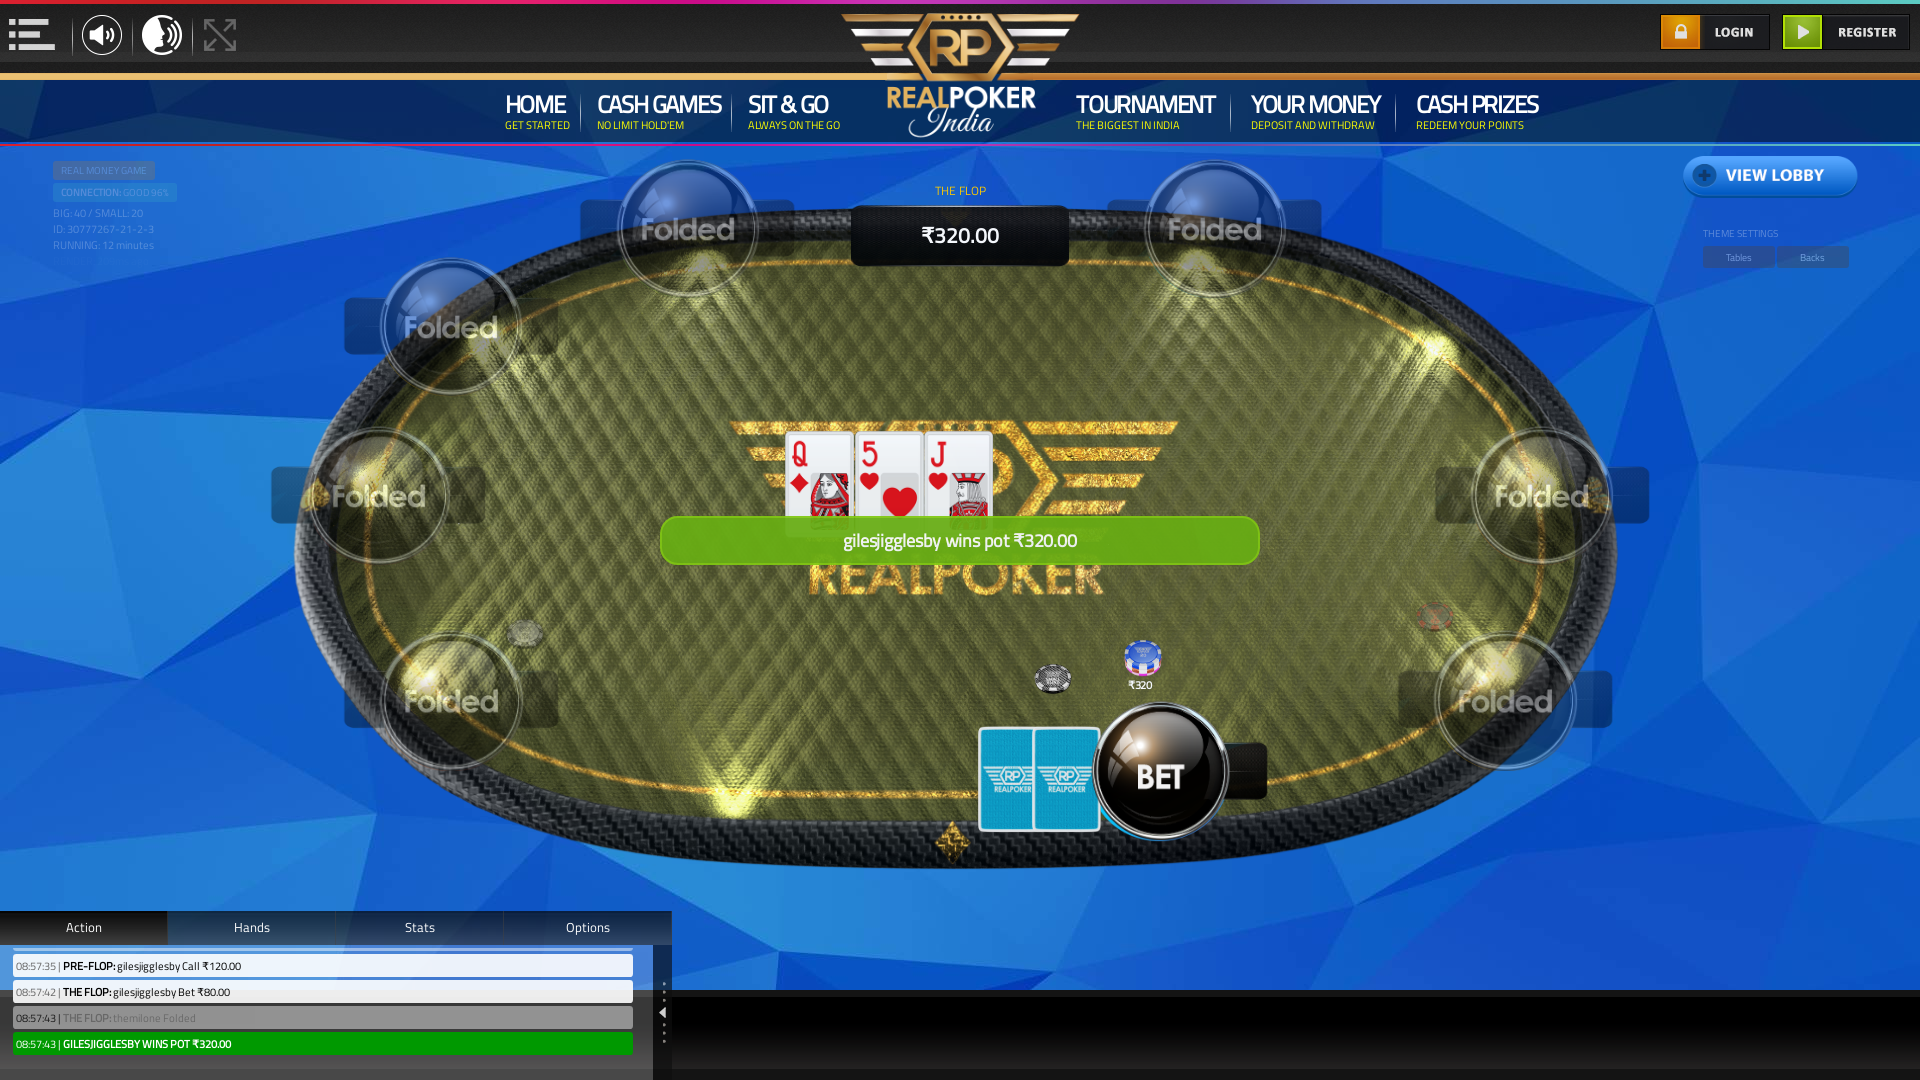 10 player texas holdem table at real poker with the table id 30777267